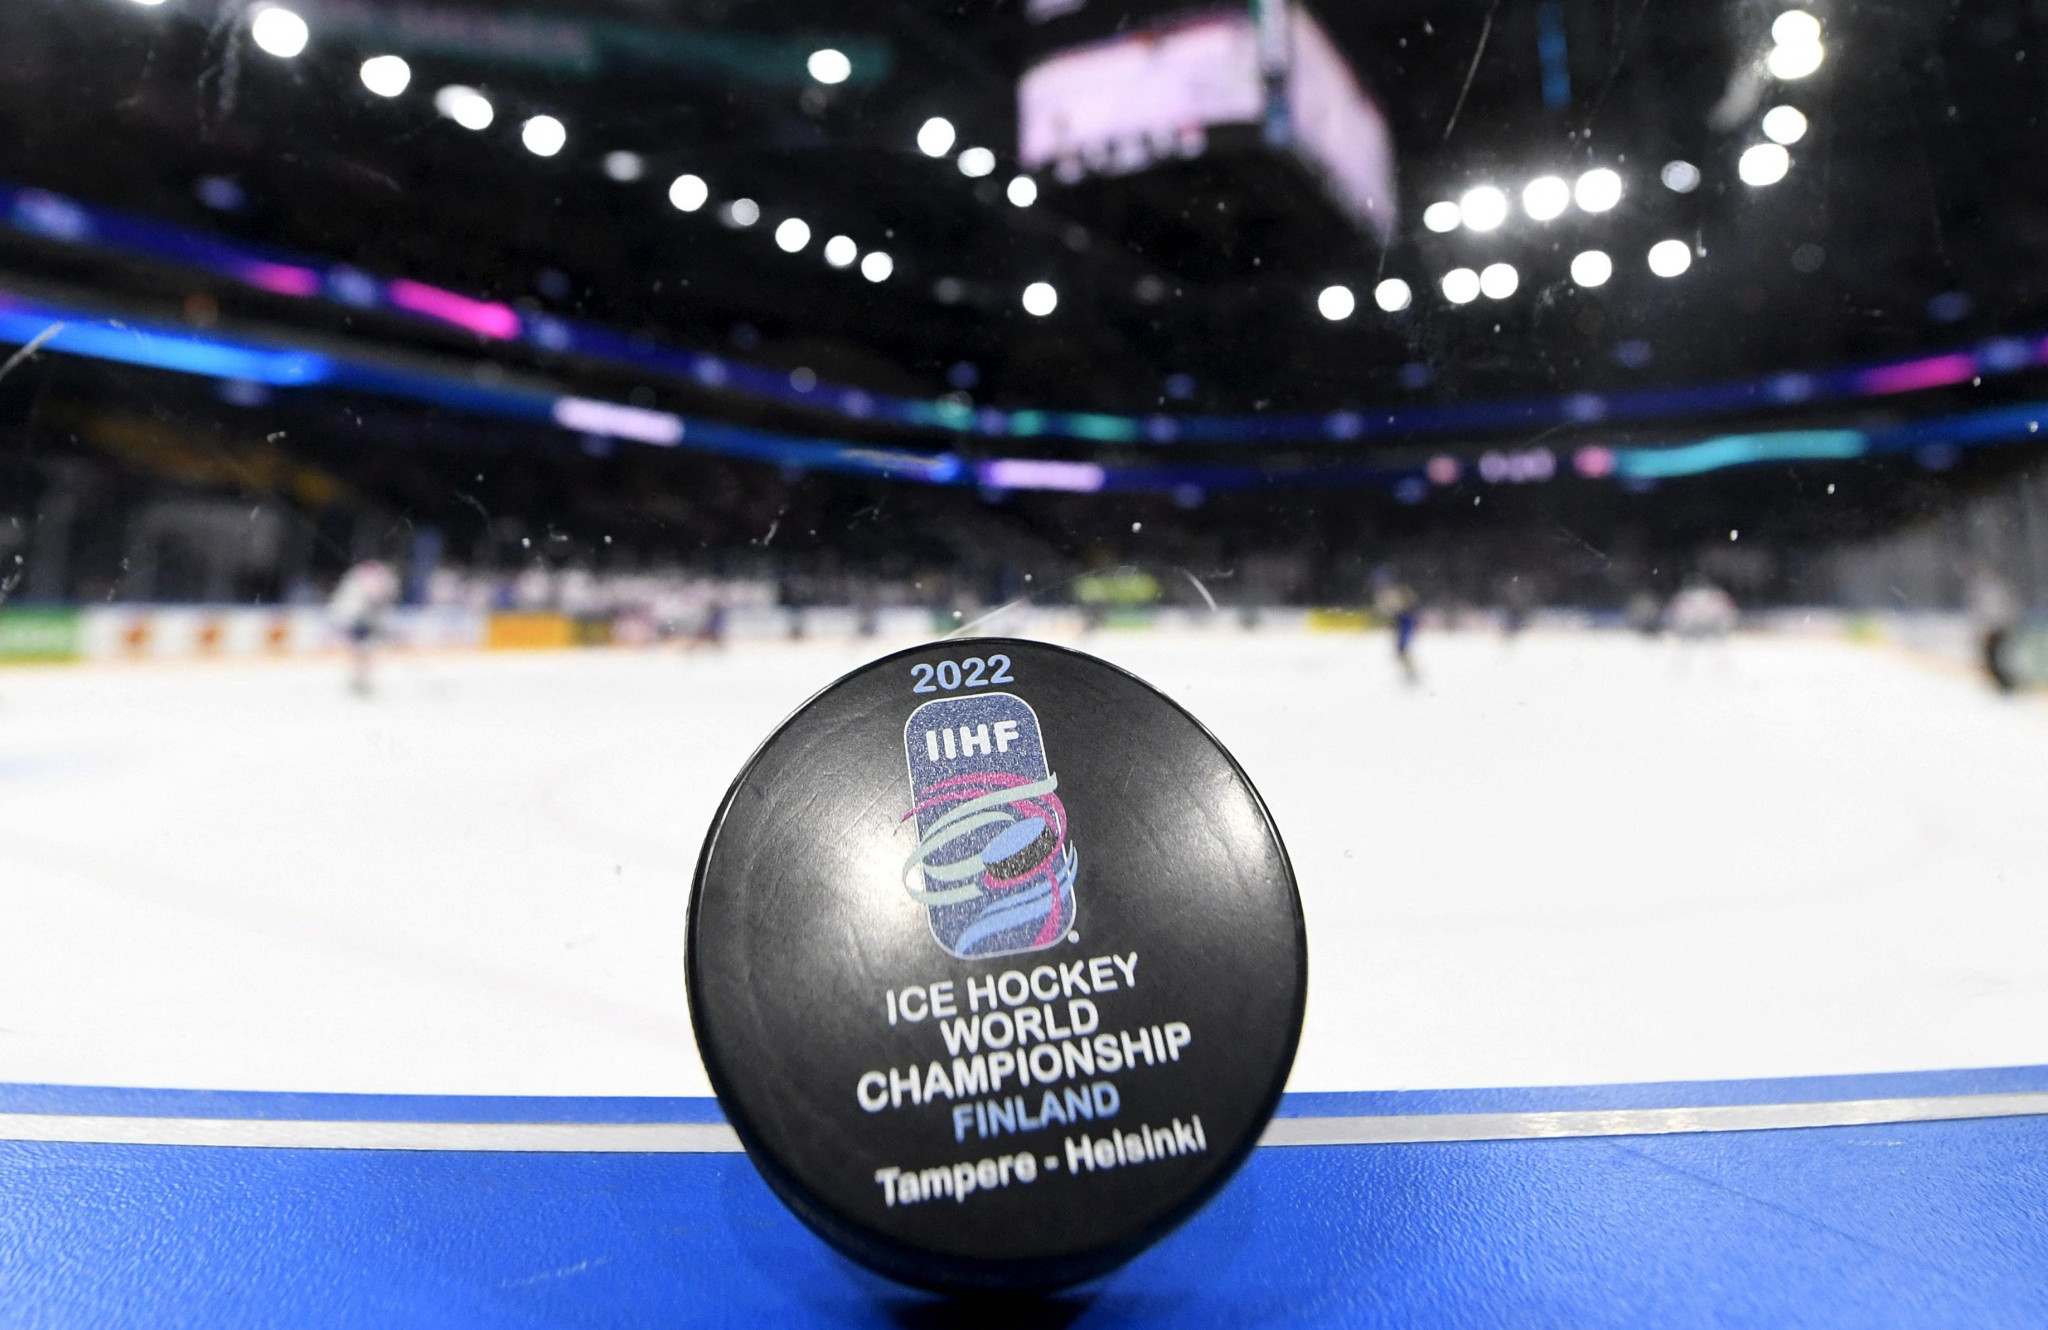 The new IIHF sport director will have a hands-on responsibility to help the organisation's events run successfully ©Getty Images